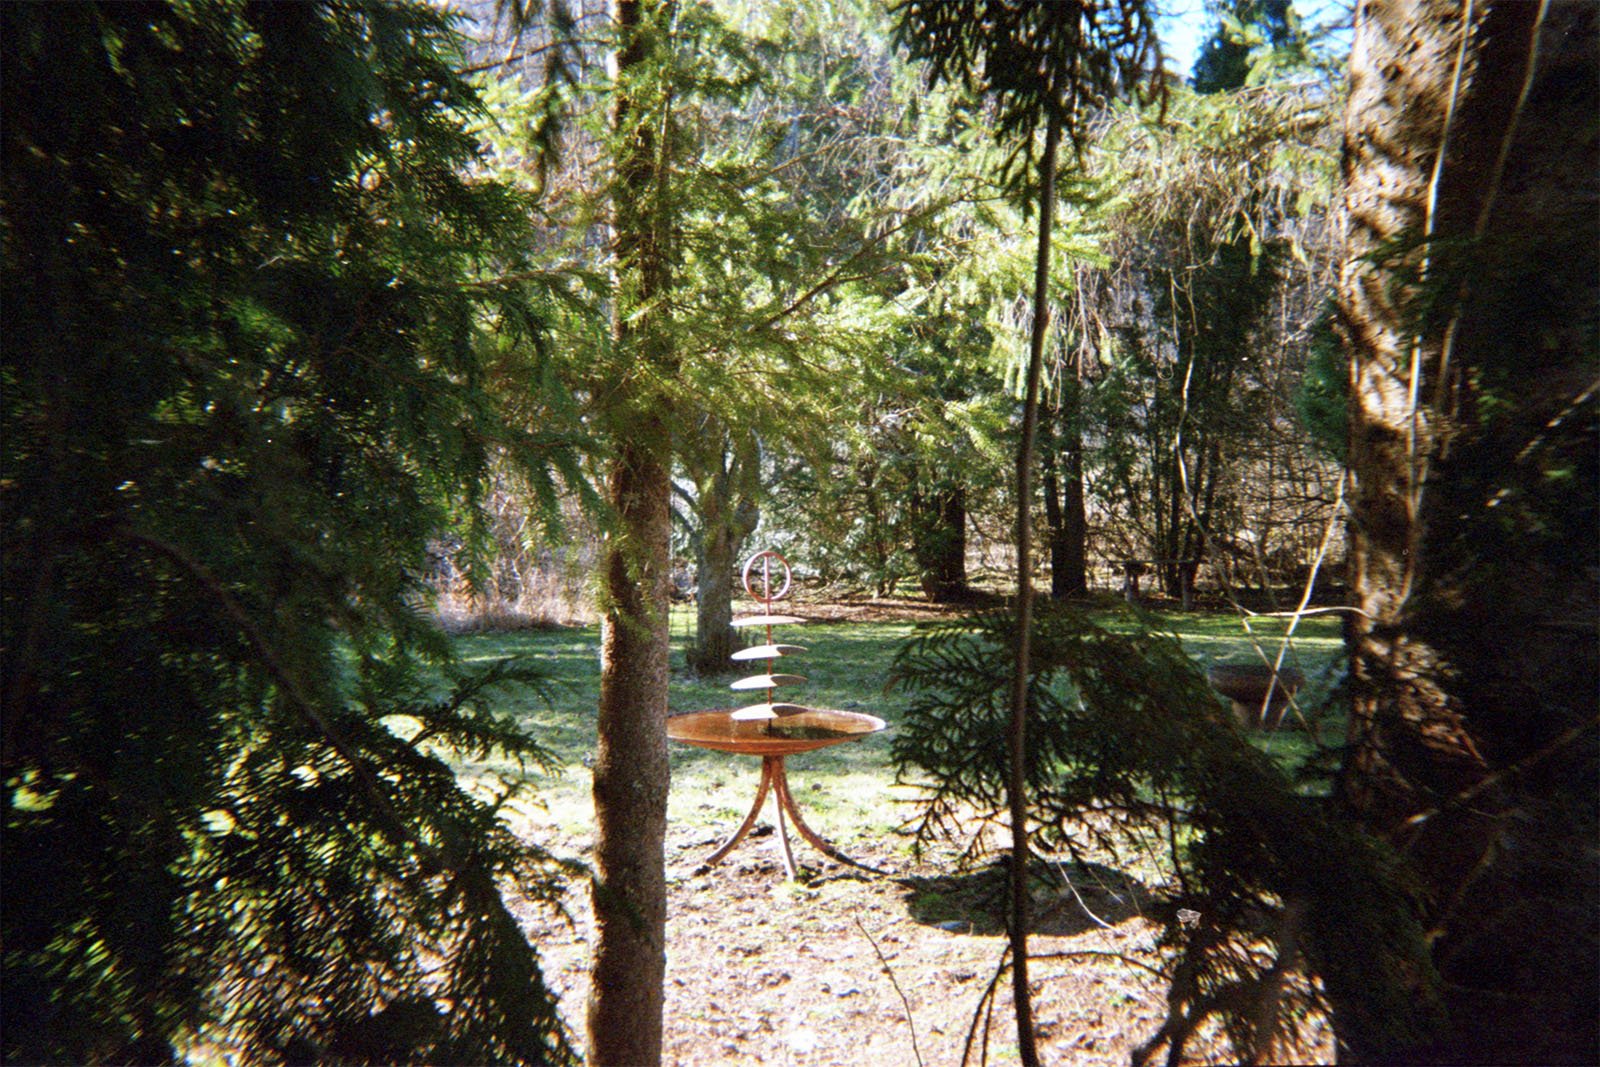 A wooden table stands in a wooded area with a stack of white plates and a metal ring suspended above them. Sunlight streams through the trees, illuminating parts of the scene and casting shadows on the ground.